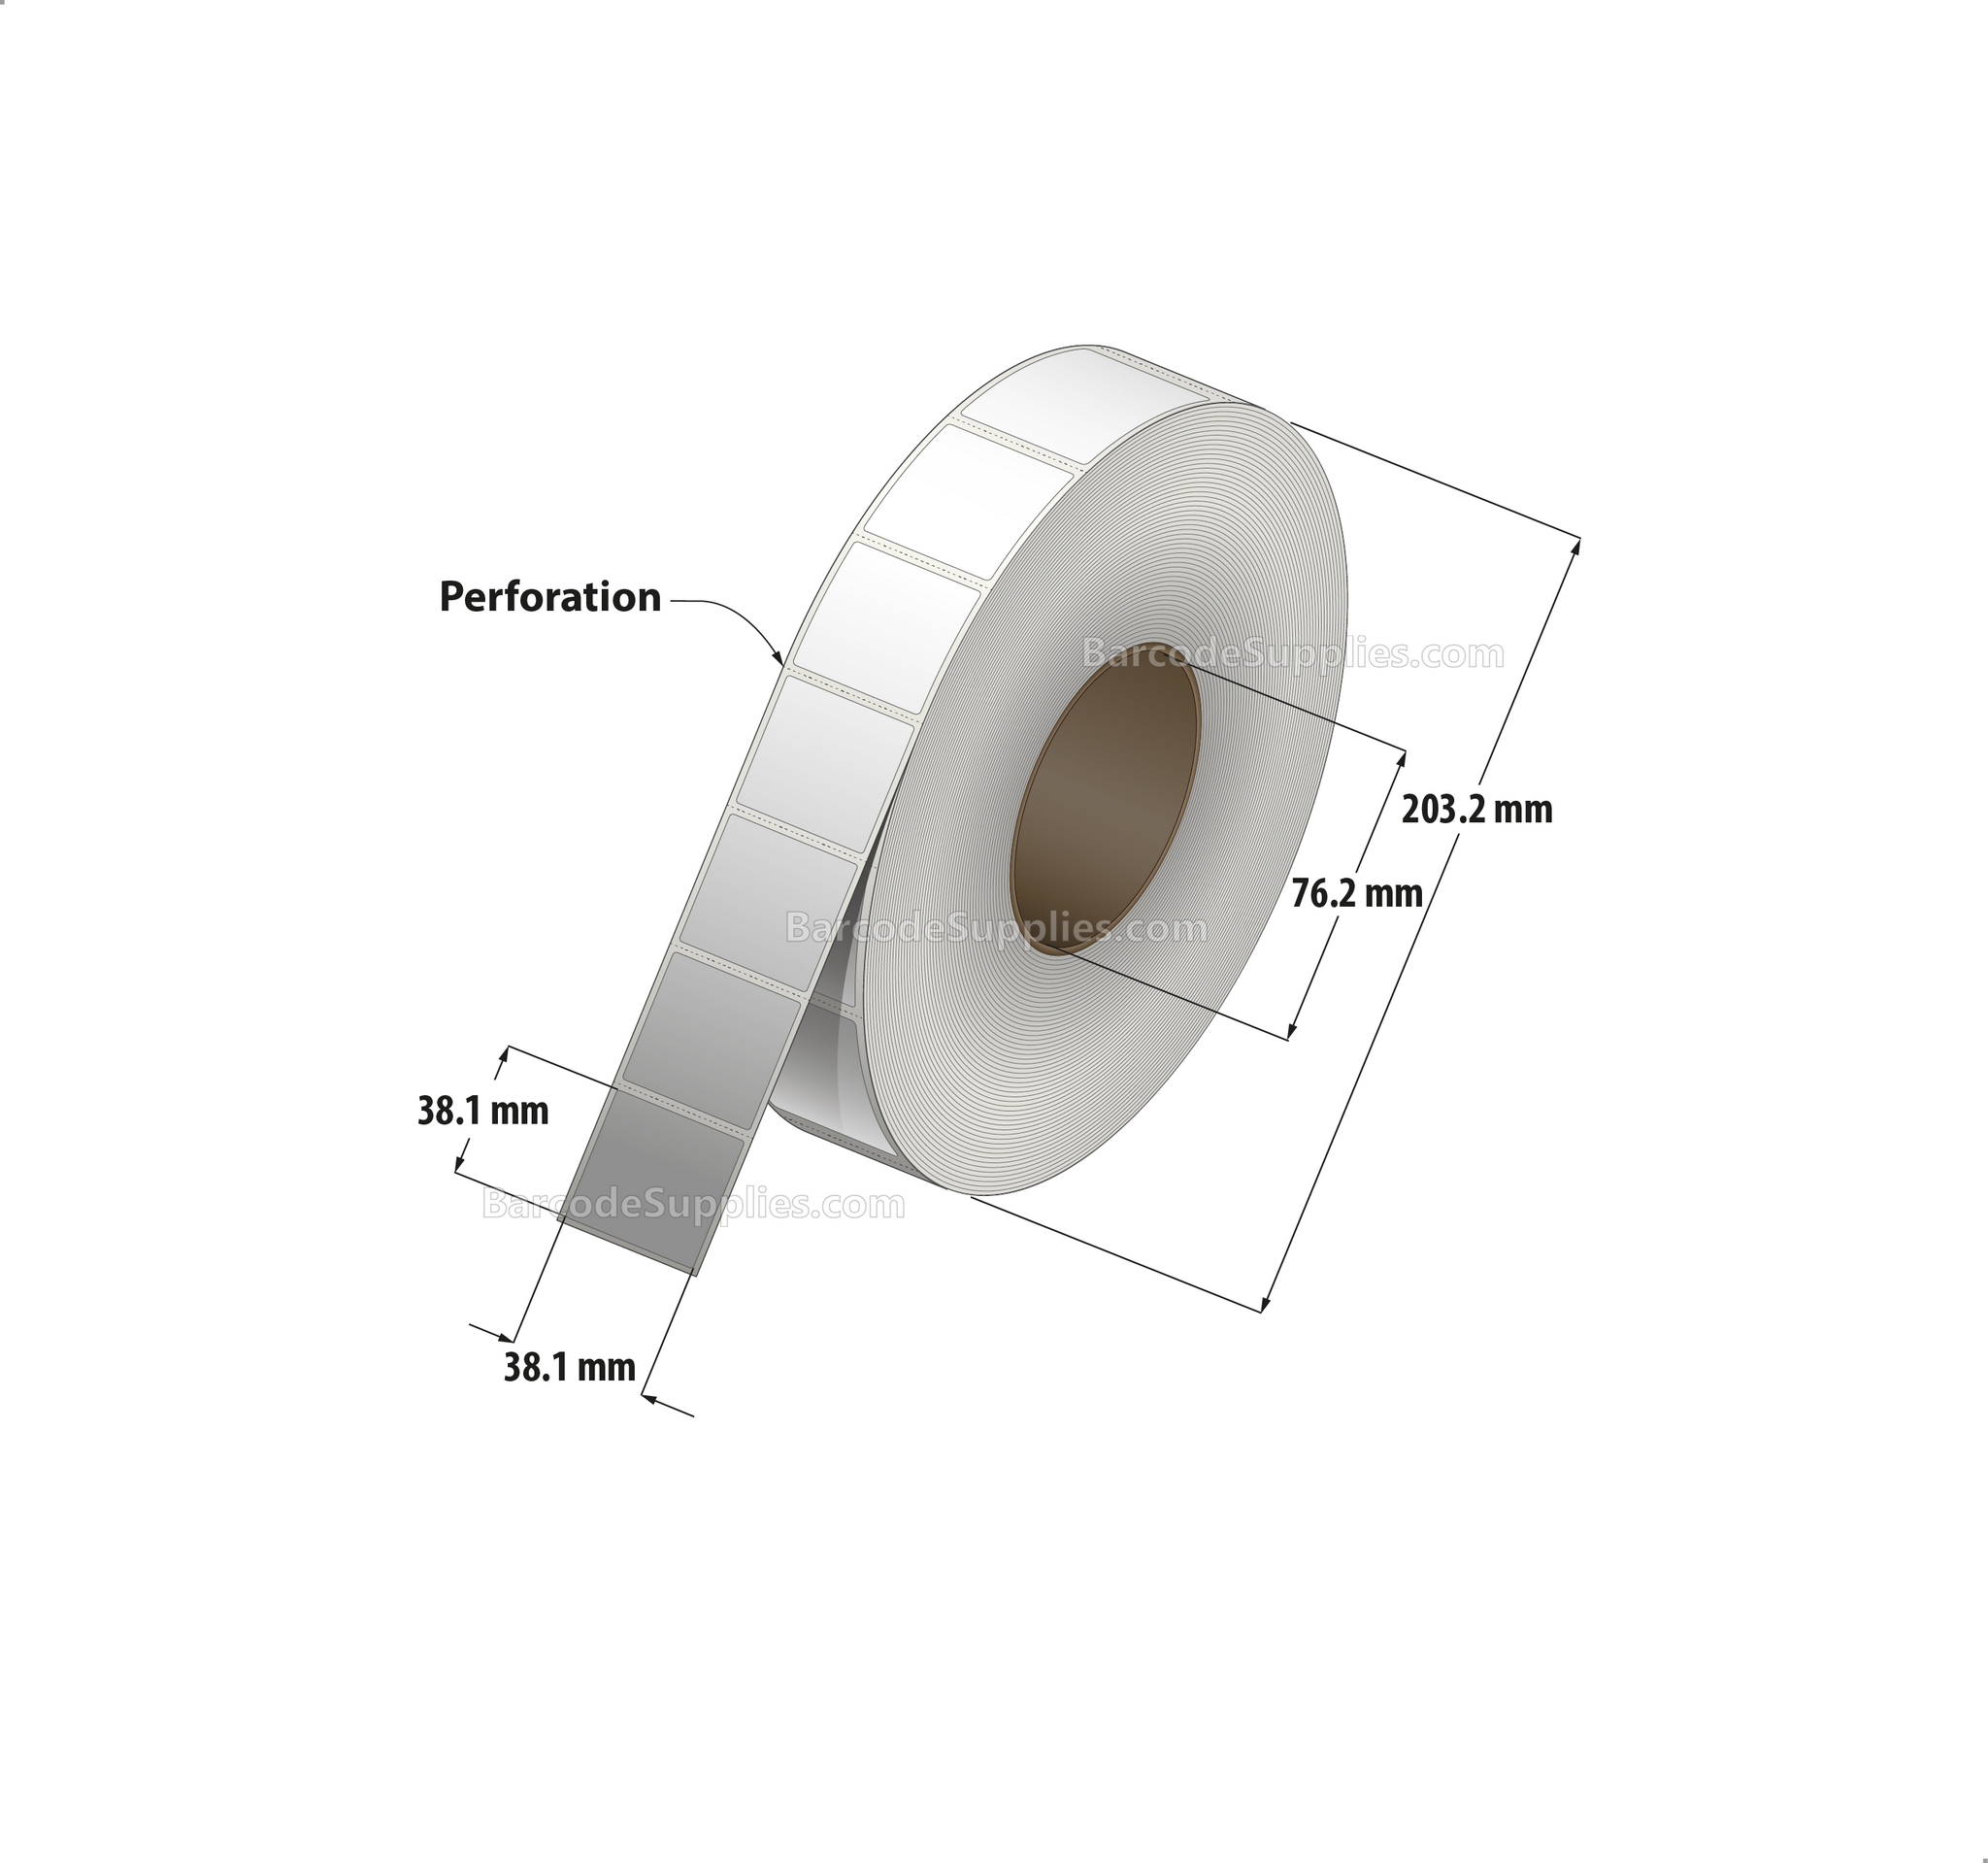 1.5 x 1.5 Thermal Transfer White Labels With Permanent Adhesive - Perforated - 7200 Labels Per Roll - Carton Of 4 Rolls - 28800 Labels Total - MPN: RT-15-15-7200-3